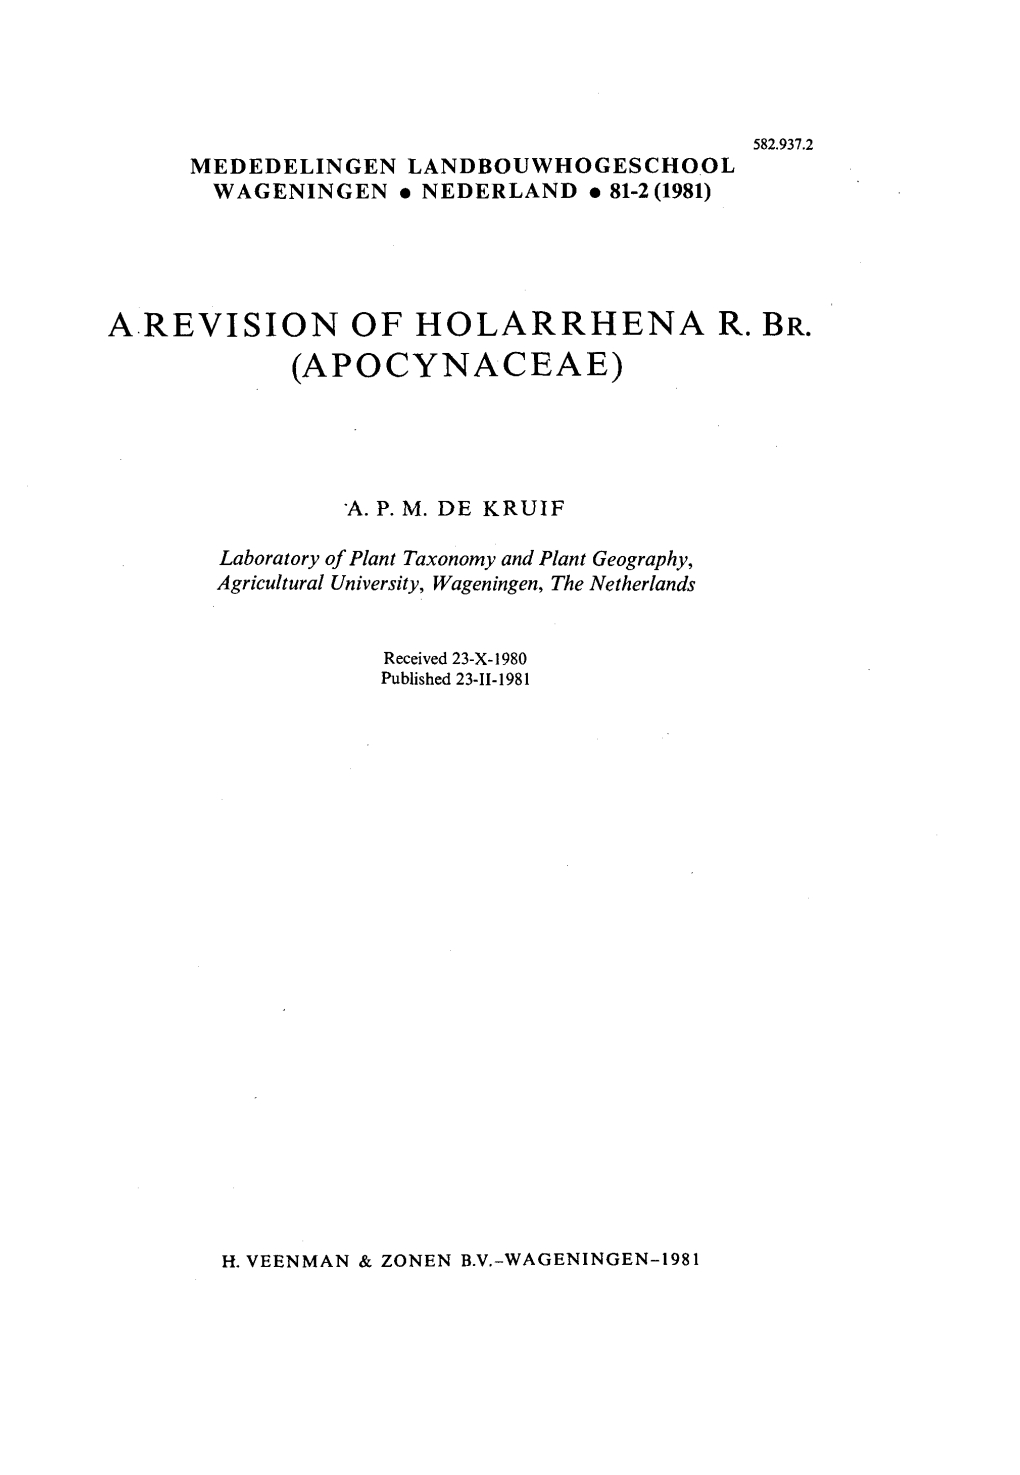 A Revision of Holarrhena R. Br. (Apocynaceae)